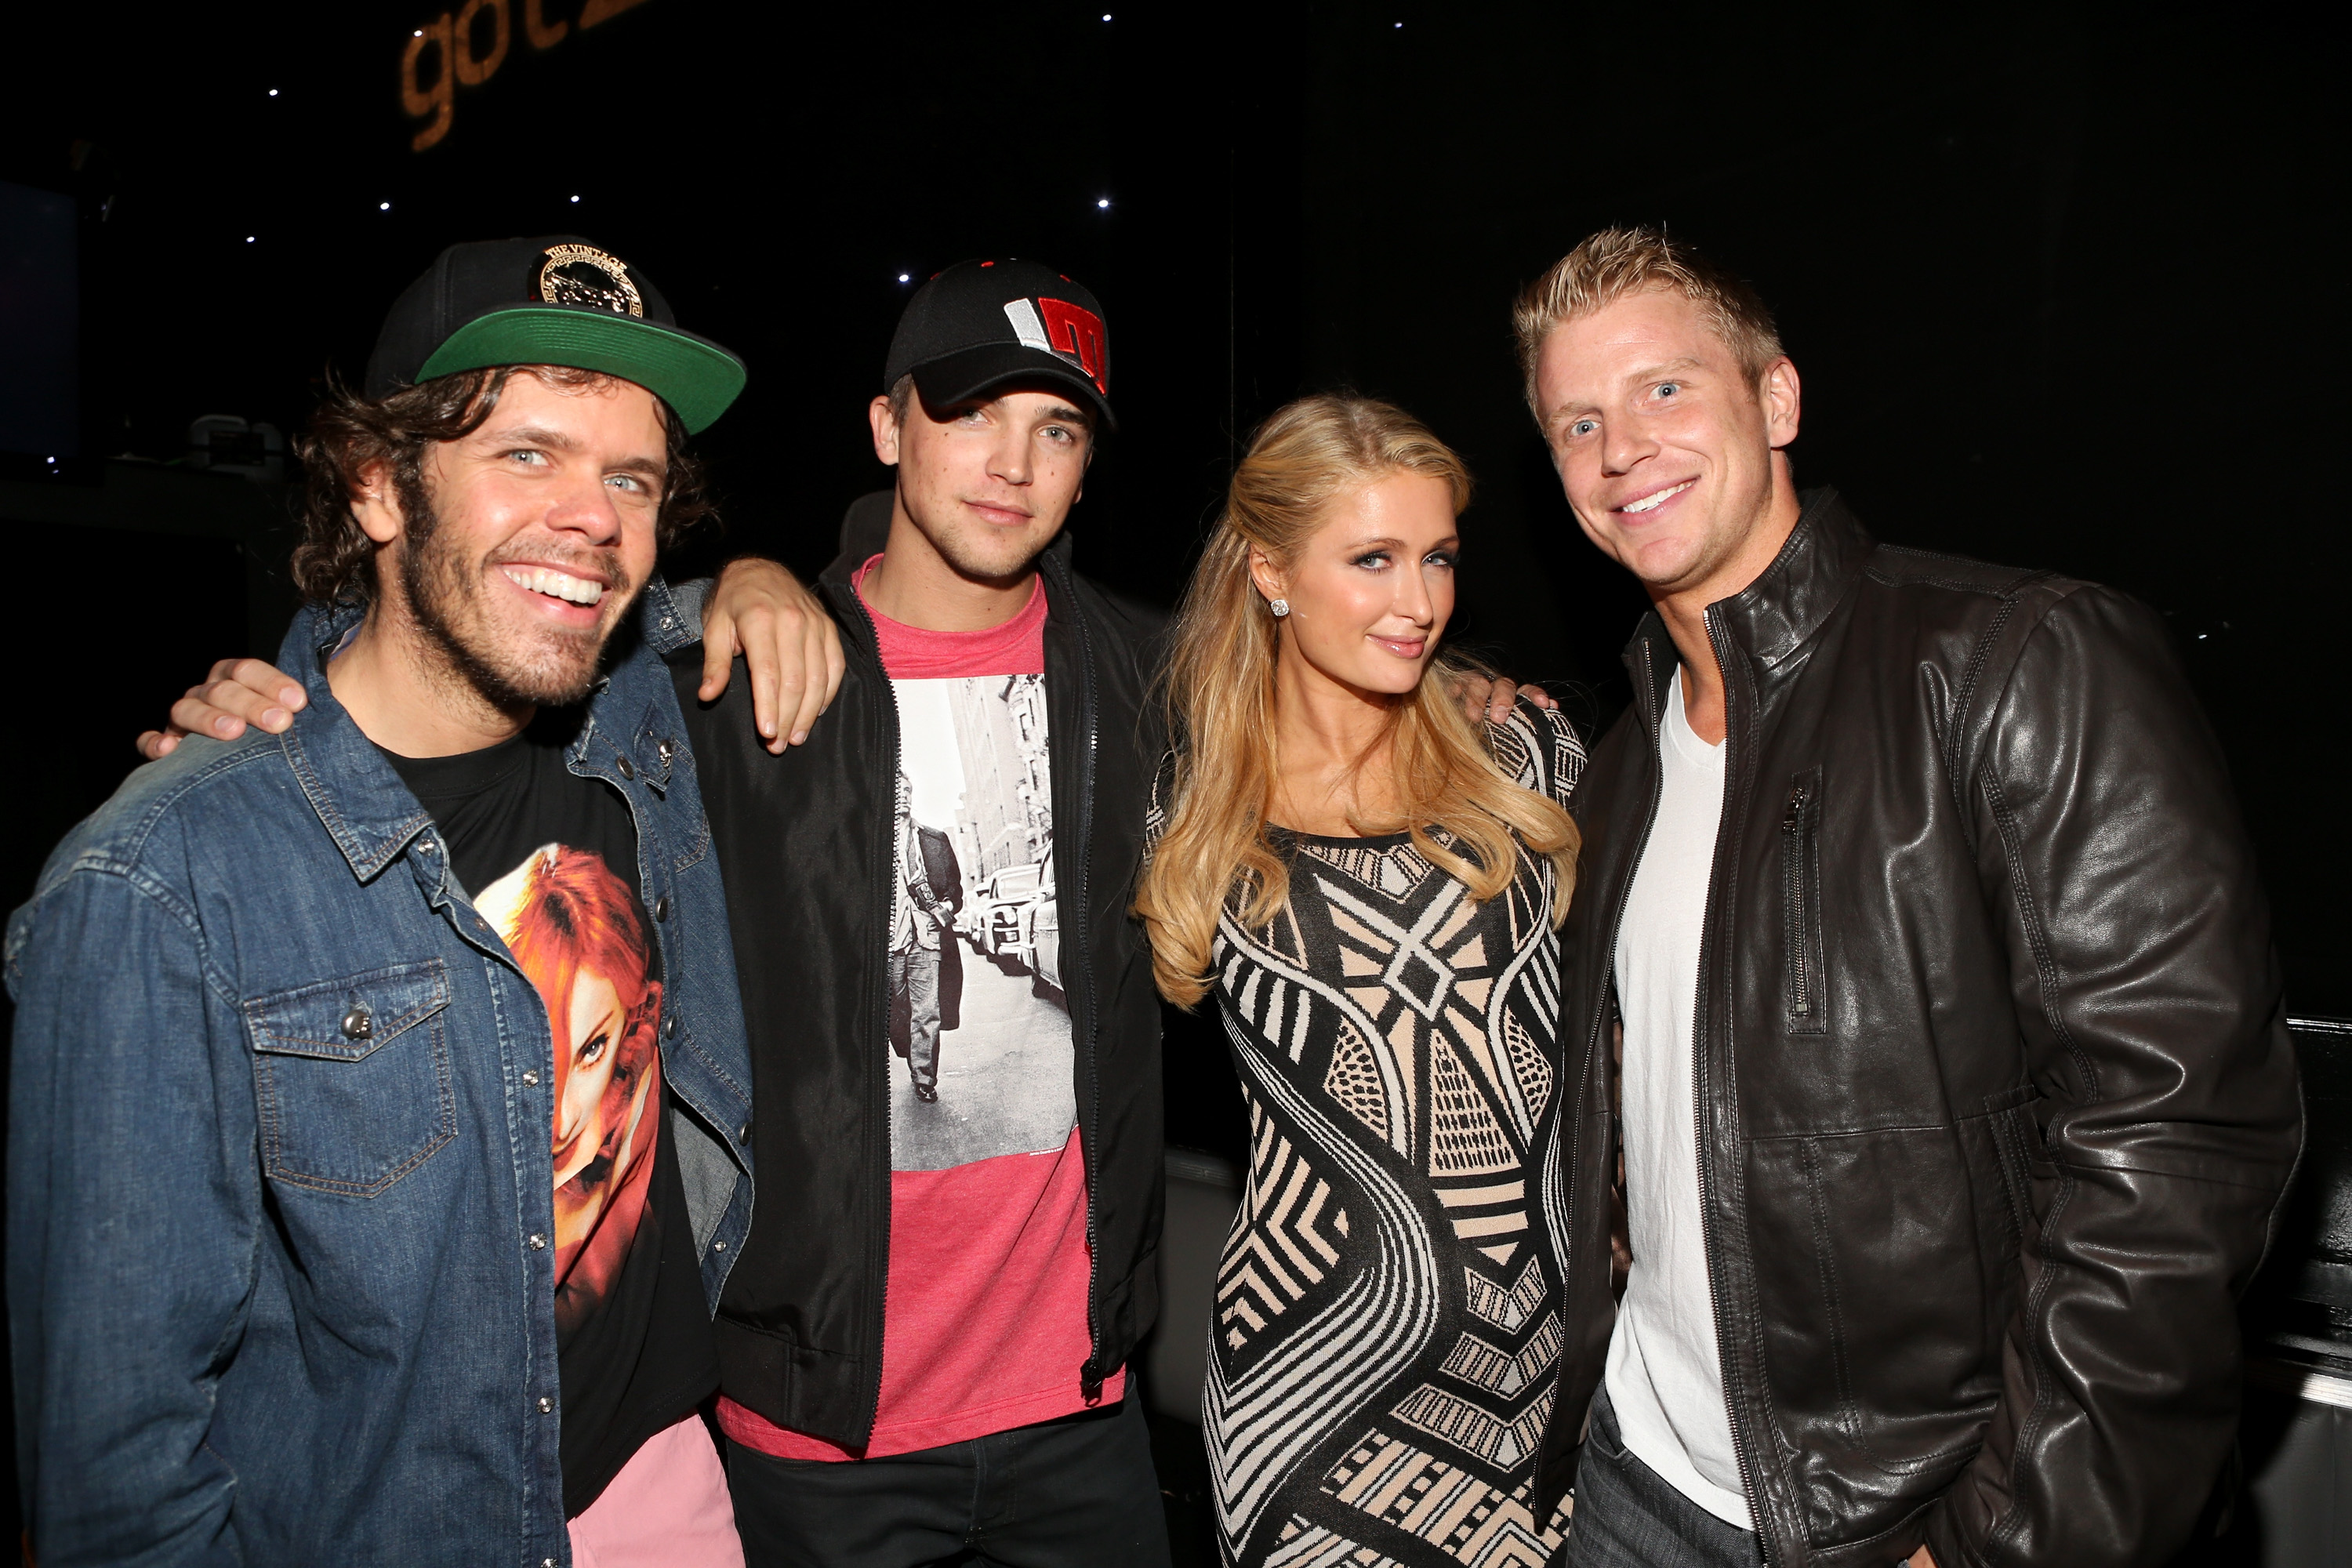 LOS ANGELES, CA - APRIL 04:  (L-R) Tv personality Perez Hilton, model  River Viiperi, tv personality Paris Hilton and tv personality Sean Lowe attend Star Magazine's Hollywood Rocks event held at Playhouse Hollywood on April 4, 2013 in Los Angeles, California.  (Photo by Jesse Grant/WireImage)